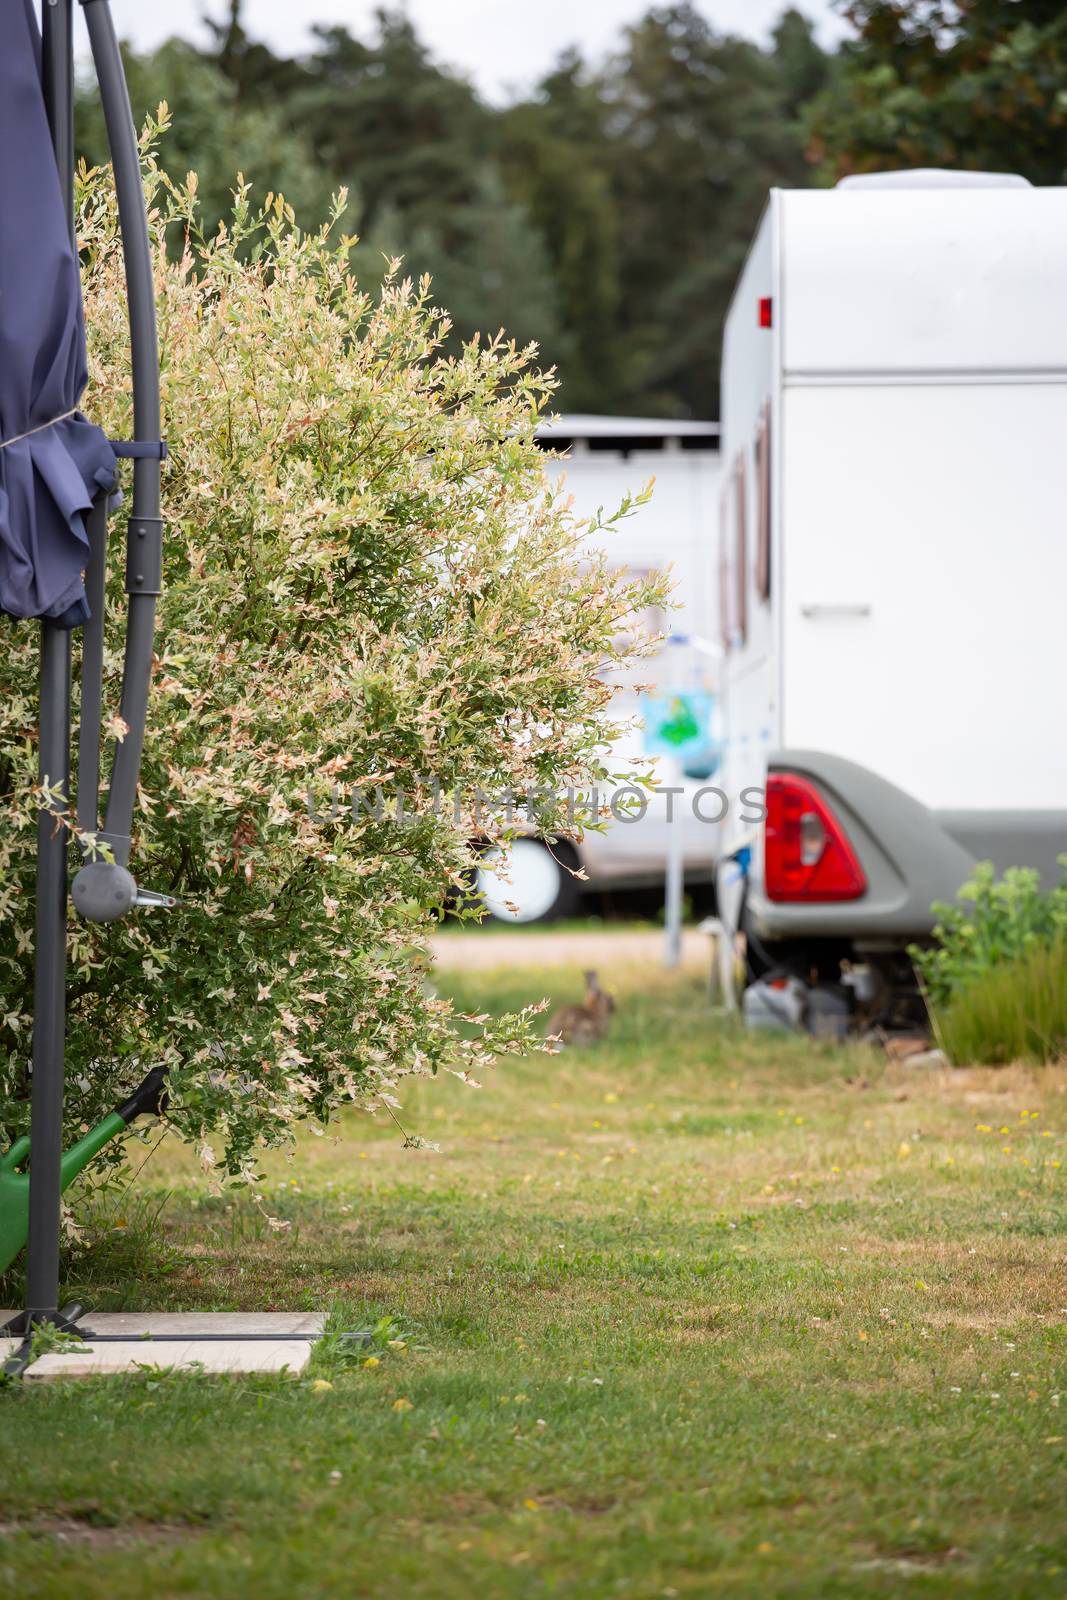 Impressions on a campsite on a sunny day by sandra_fotodesign